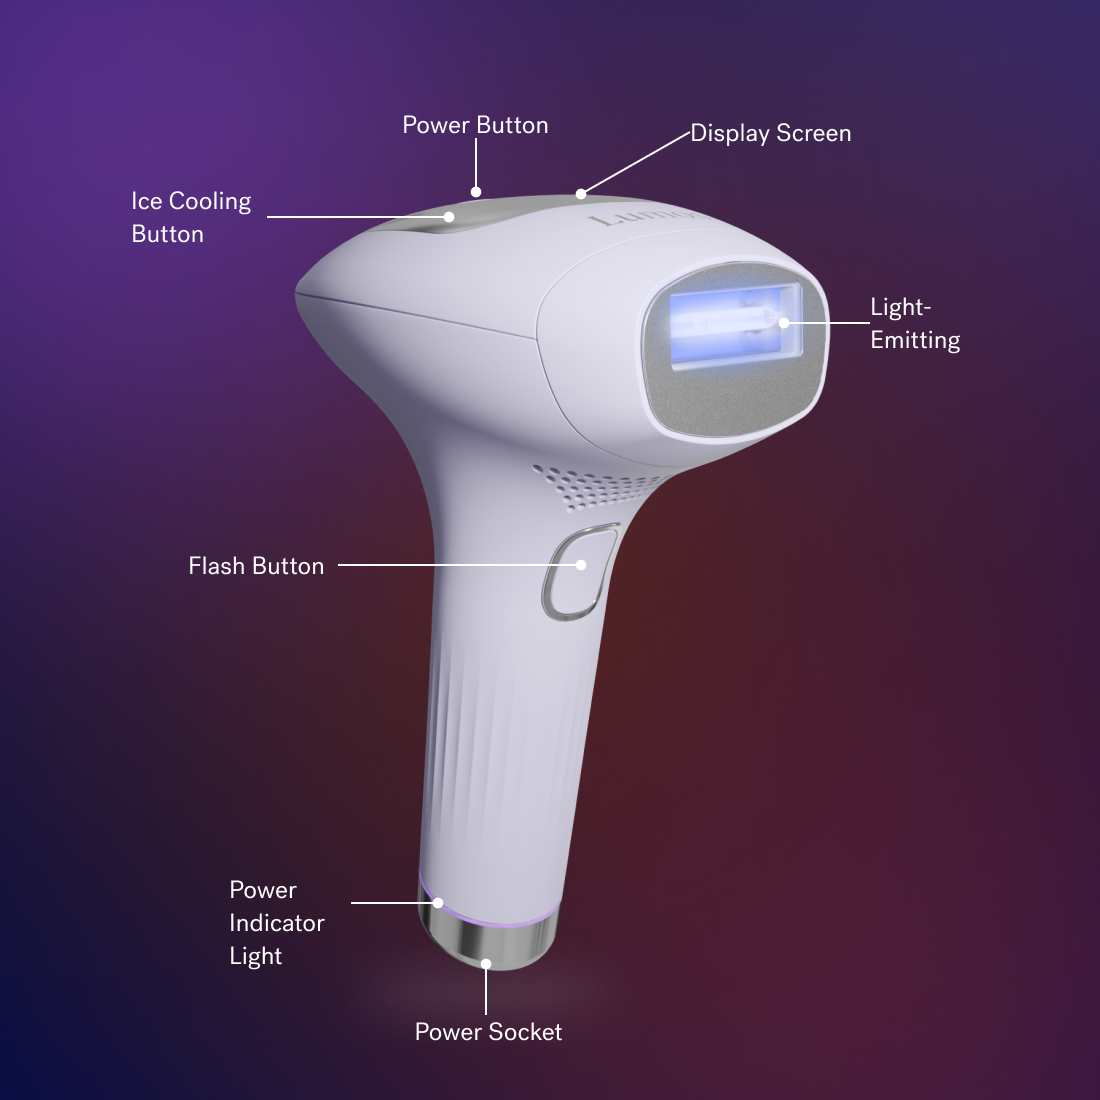 Lavender Lust - A handheld electronic device with labeled parts: Power Button, Display Screen, Light-Emitting Surface, Flash Button, Ice Cooling Button, Power Indicator Light, and Power Socket. Integrated with COOLMAX technology and a safety skin sensor for effective IPL hair removal. Introducing Lumos IPL by Michael Todd Beauty.